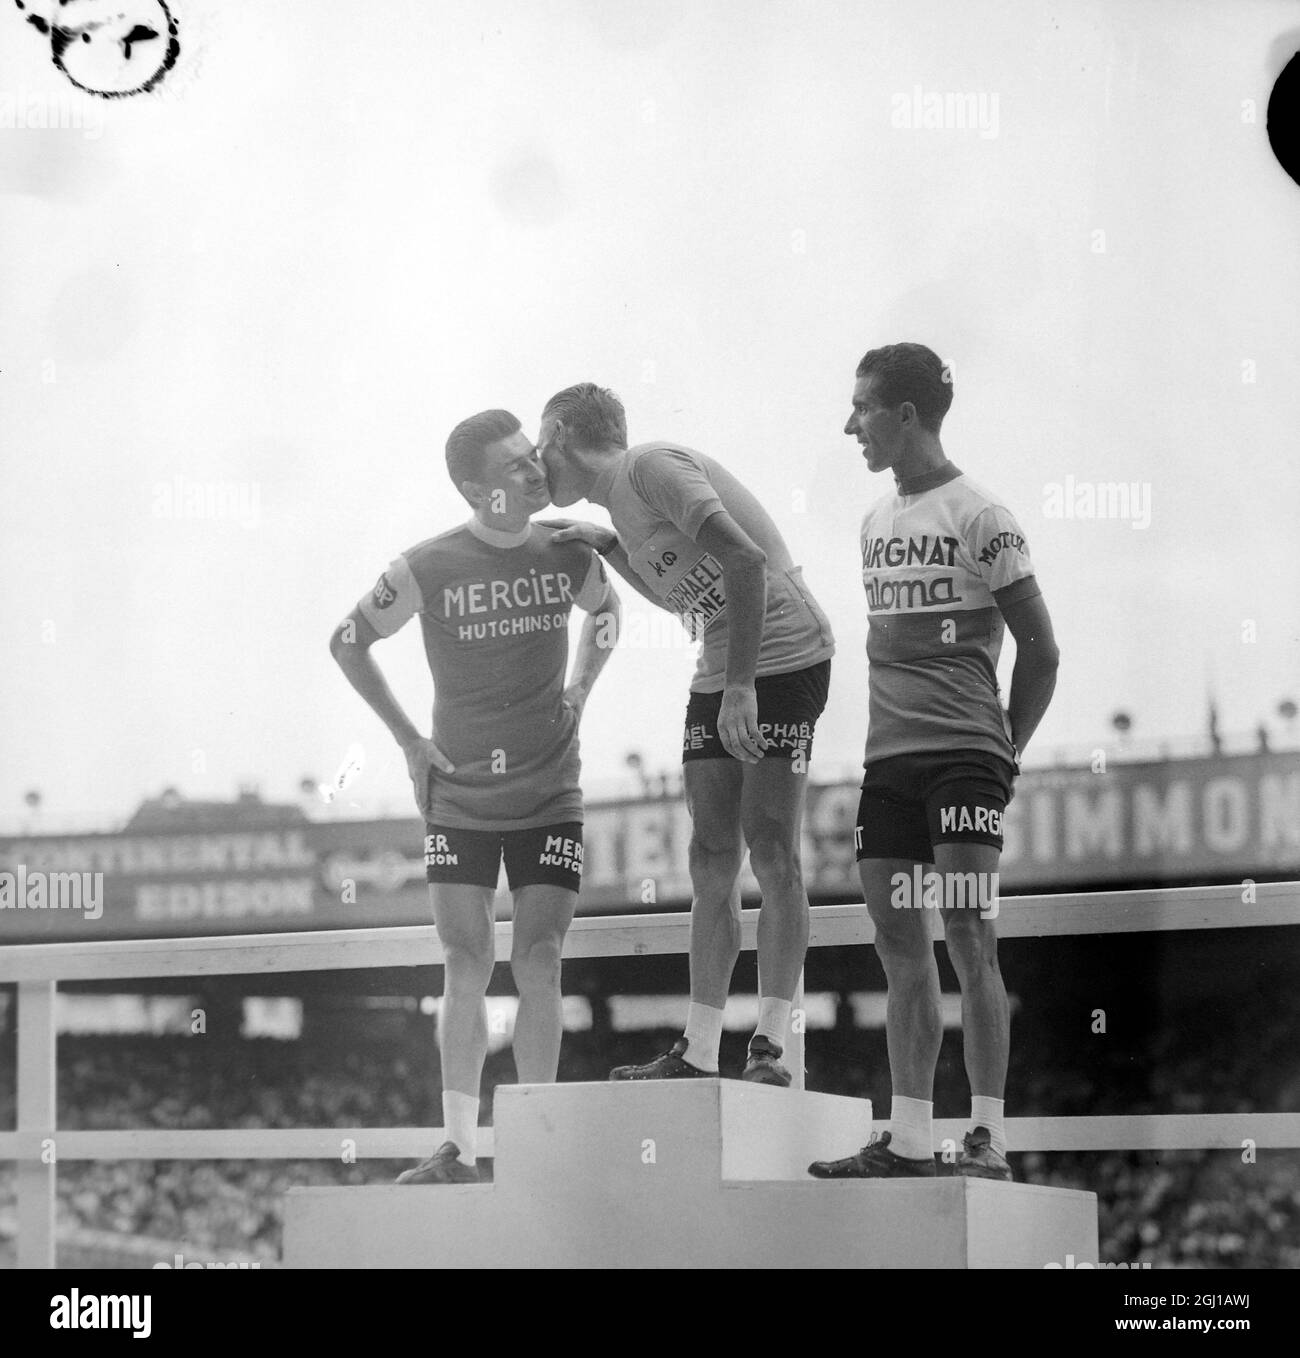 CYCLING TOUR DE FRANCE JACQUES ANQUETIL WINS WITH RAYMOND POULIDOR 2ND IN PARIS ; 15 JULY 1964 Stock Photo